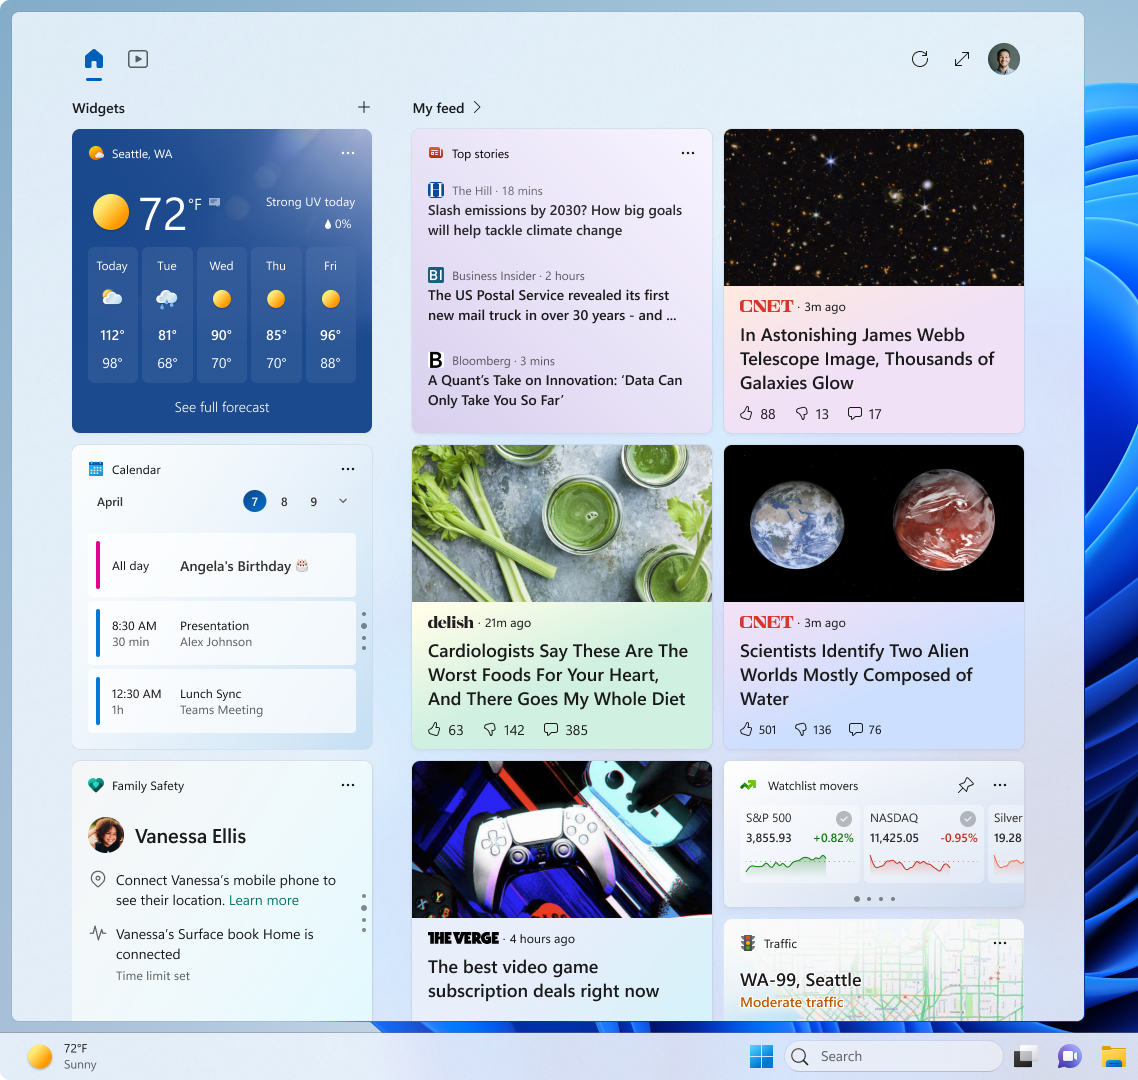 Example of updated widgets board with larger canvas and dedicated sections for widgets and feed content